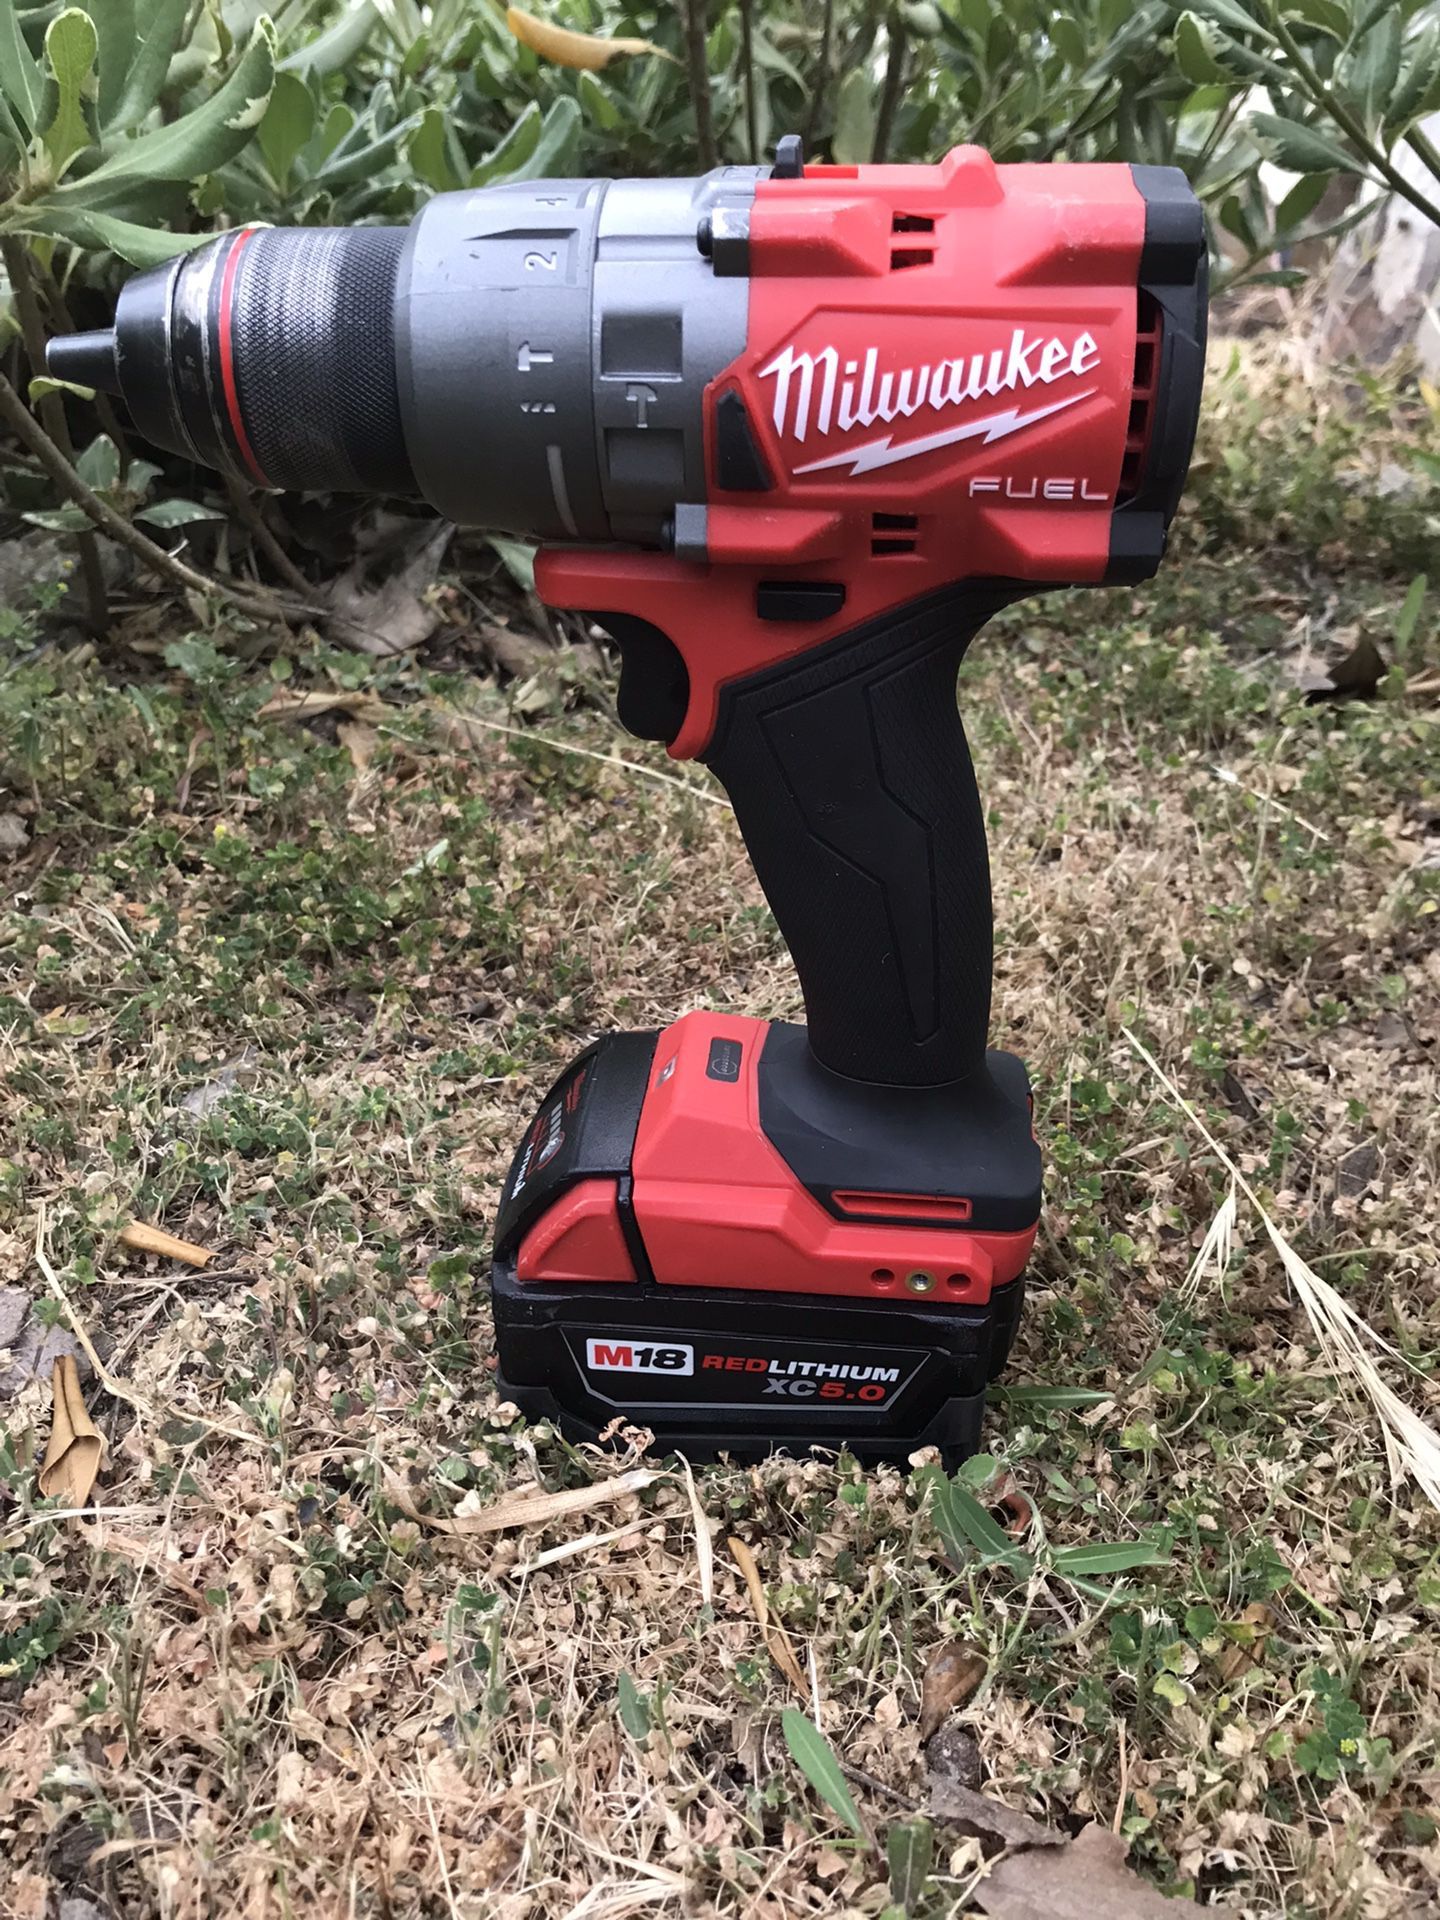  (2904-20) Milwaukee M18 Fuel 1/2" Hammer Drill/Driver with M18 REDLITHIUM XC 5.0 Ah Battery